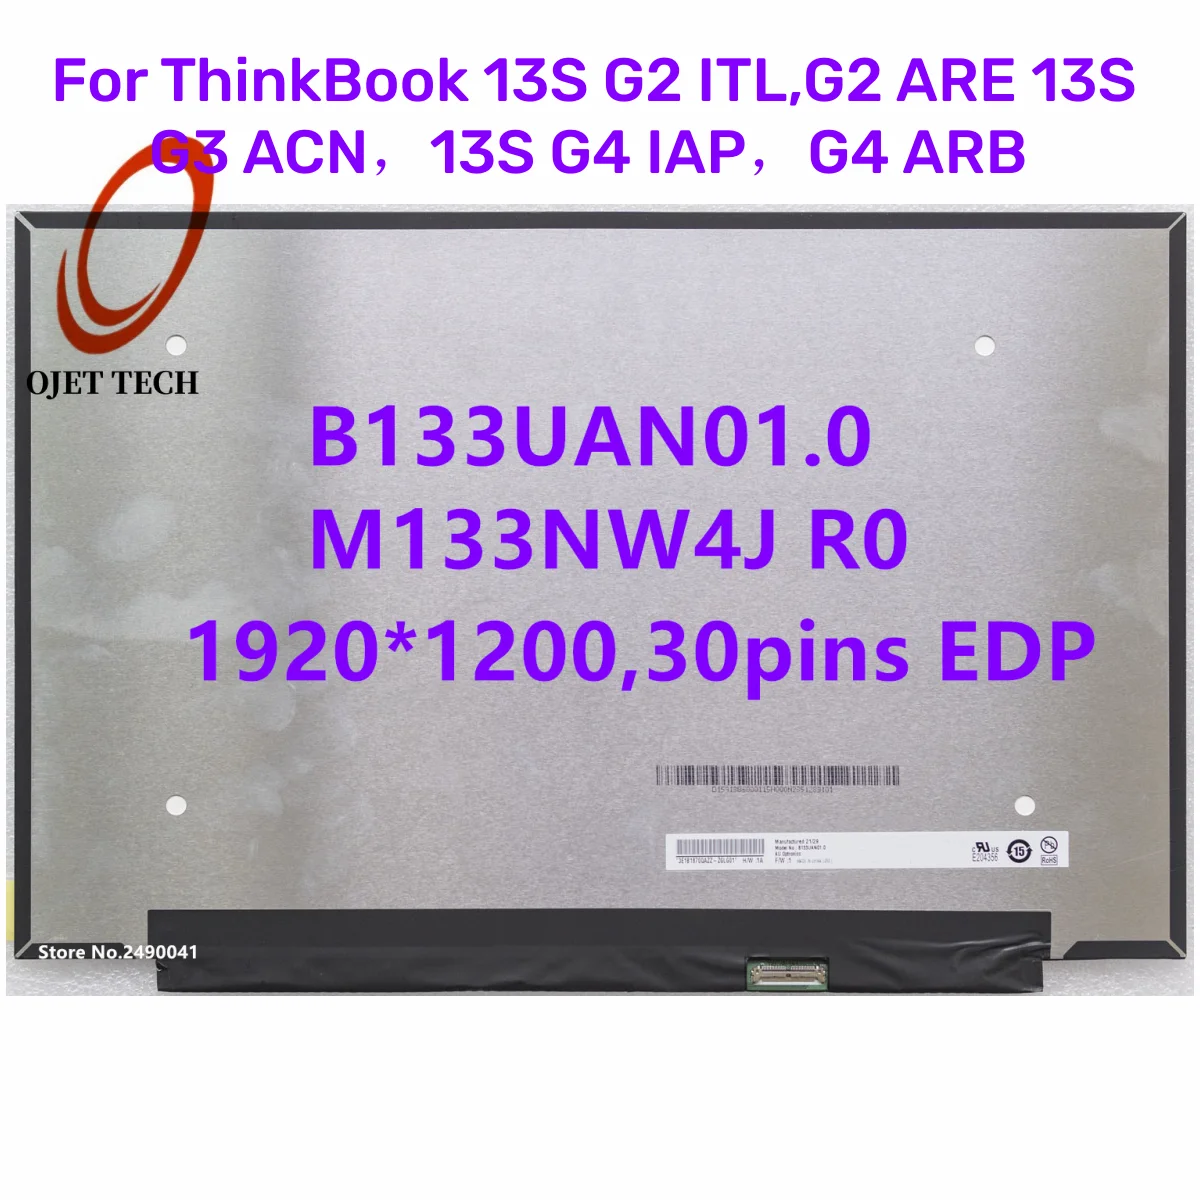 

13.3" Laptop LCD Screen B133UAN01.0 M133NW4J R0 for Lenovo ThinkBook 13s G2 ITL ARE G3 ACN G4 IAP ARB 1920x1200 IPS Display